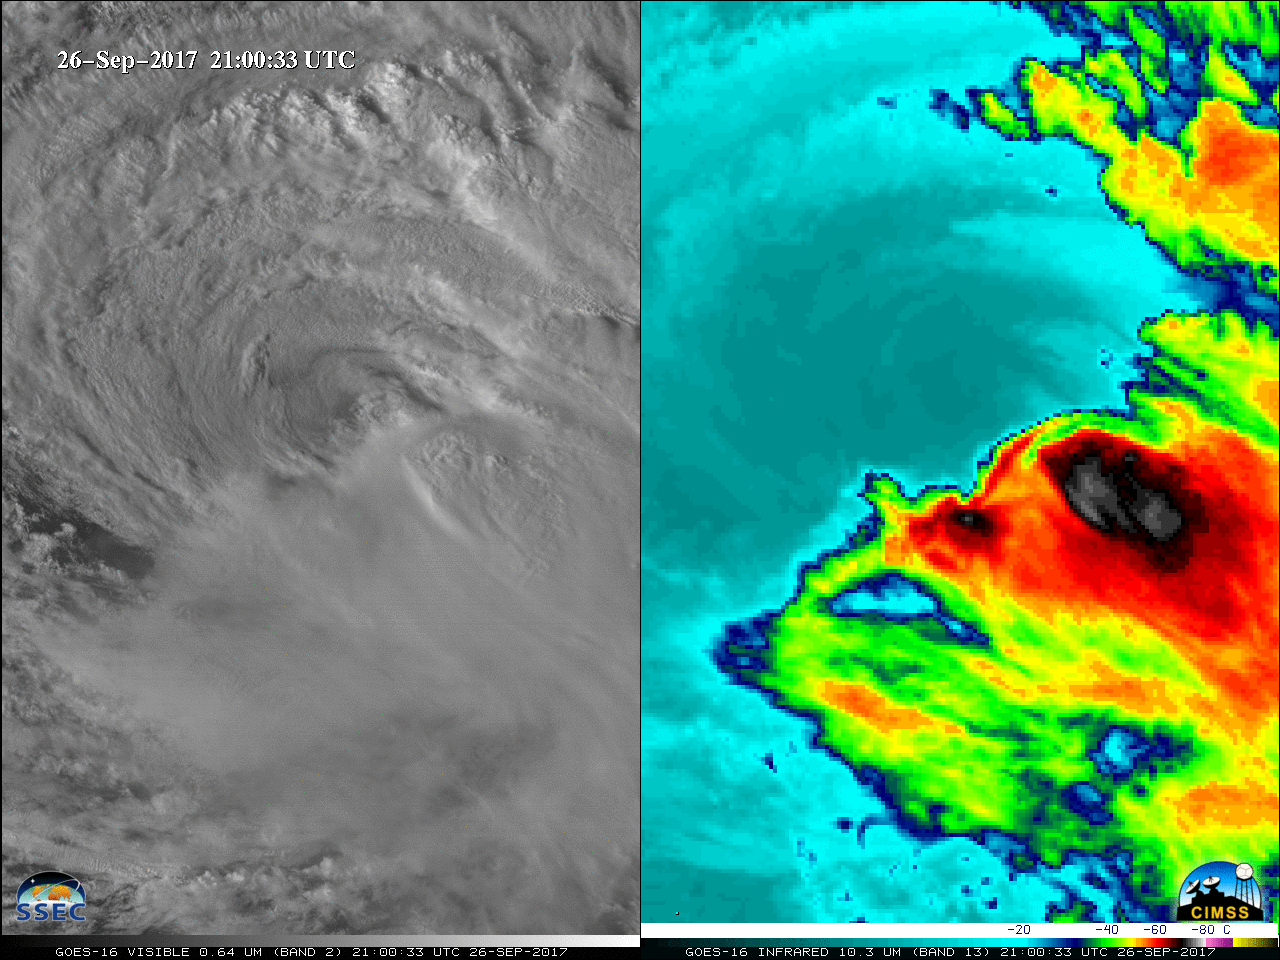 GOES-16 Visible (0.64 µm, left) and Infrared Window (10.3 µm, right) images [click to play MP4 animation]